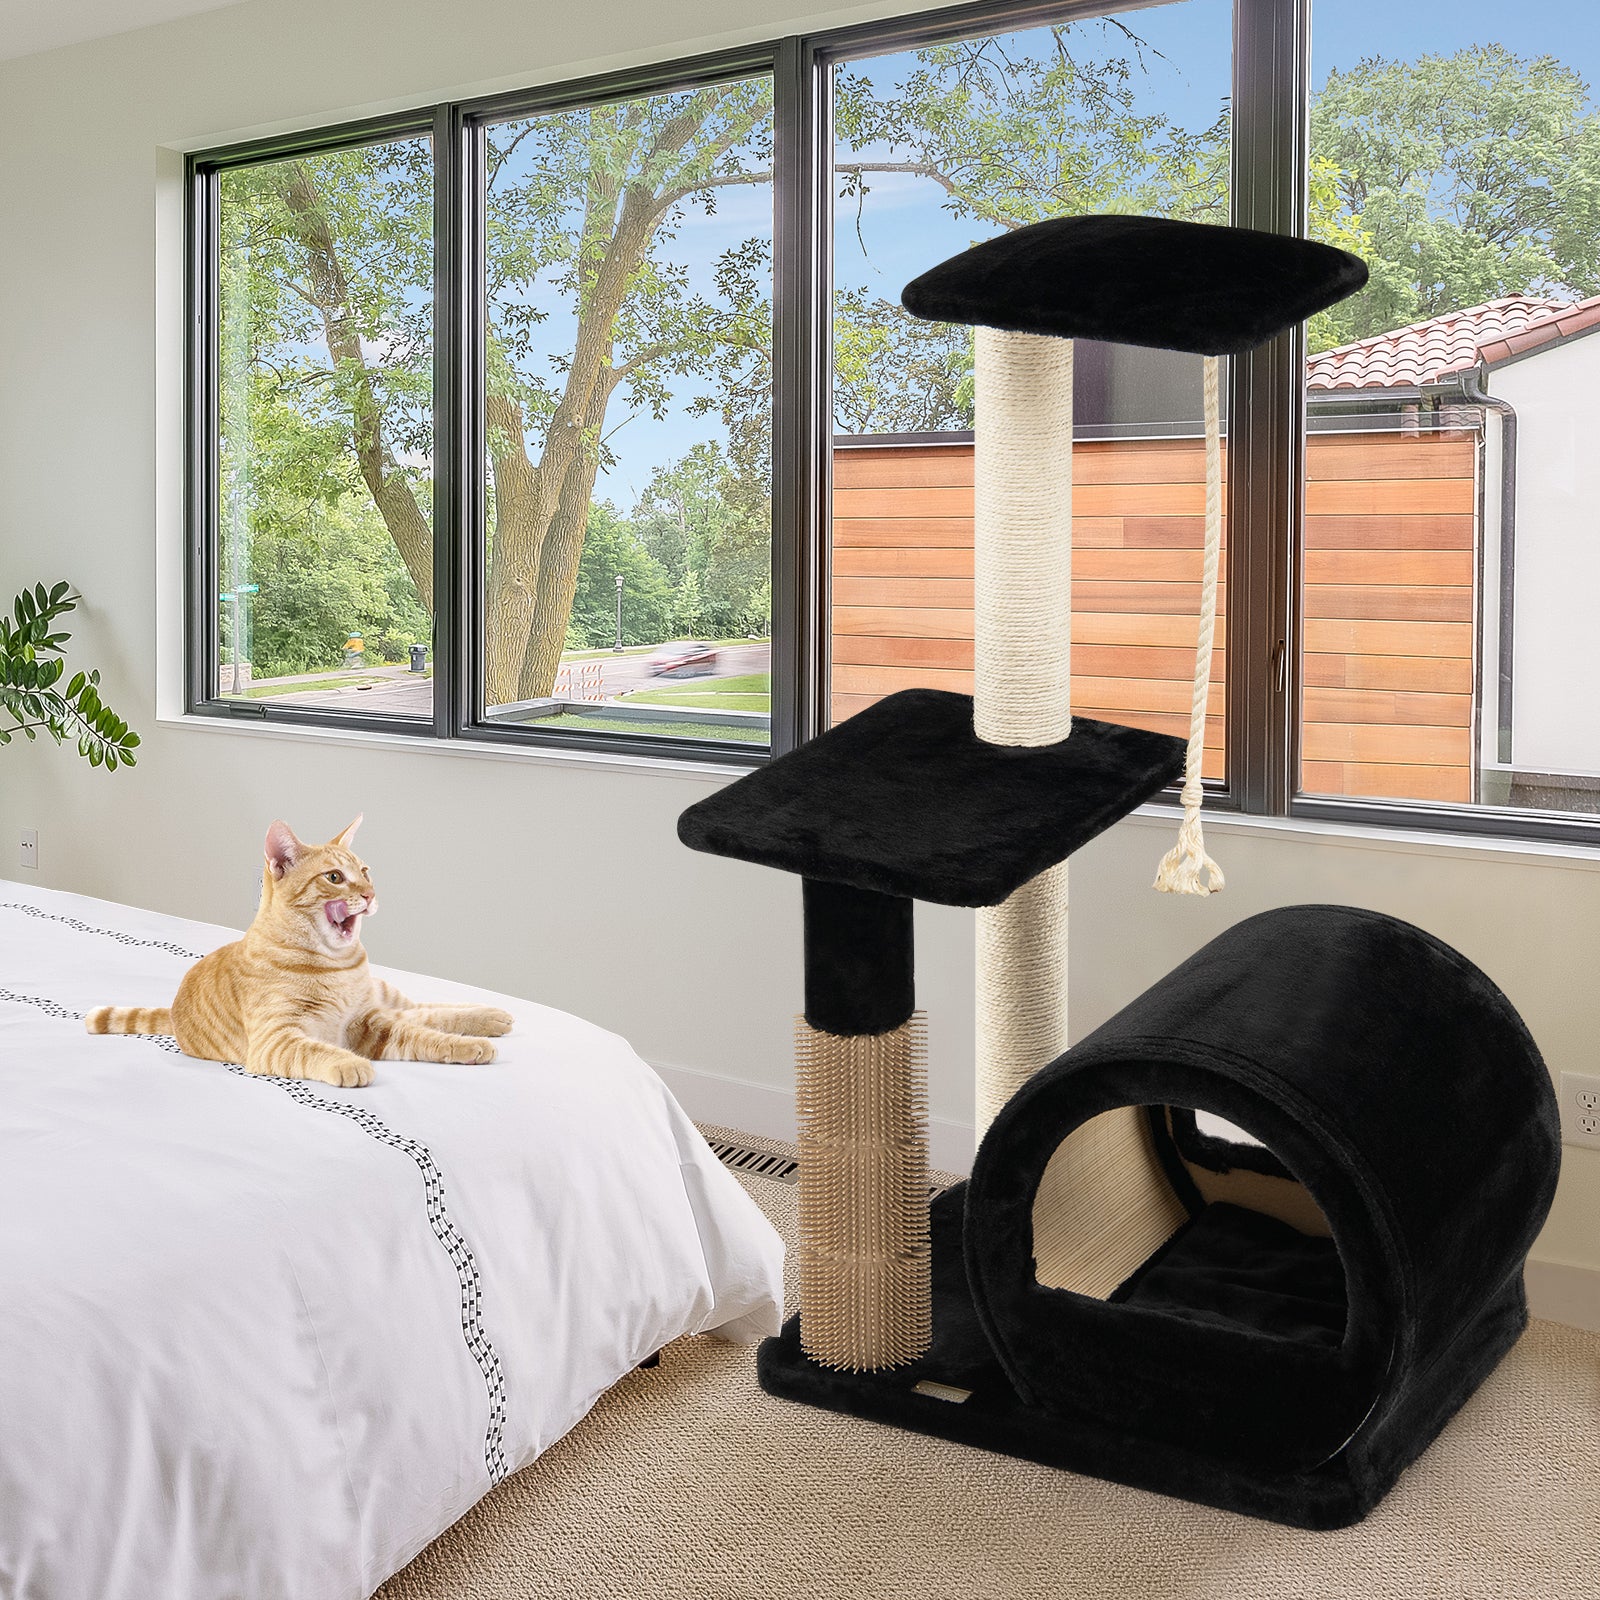 Multi-level Kitty Condo Climbing Tower with Groom Brush and Sisal Rope-Black